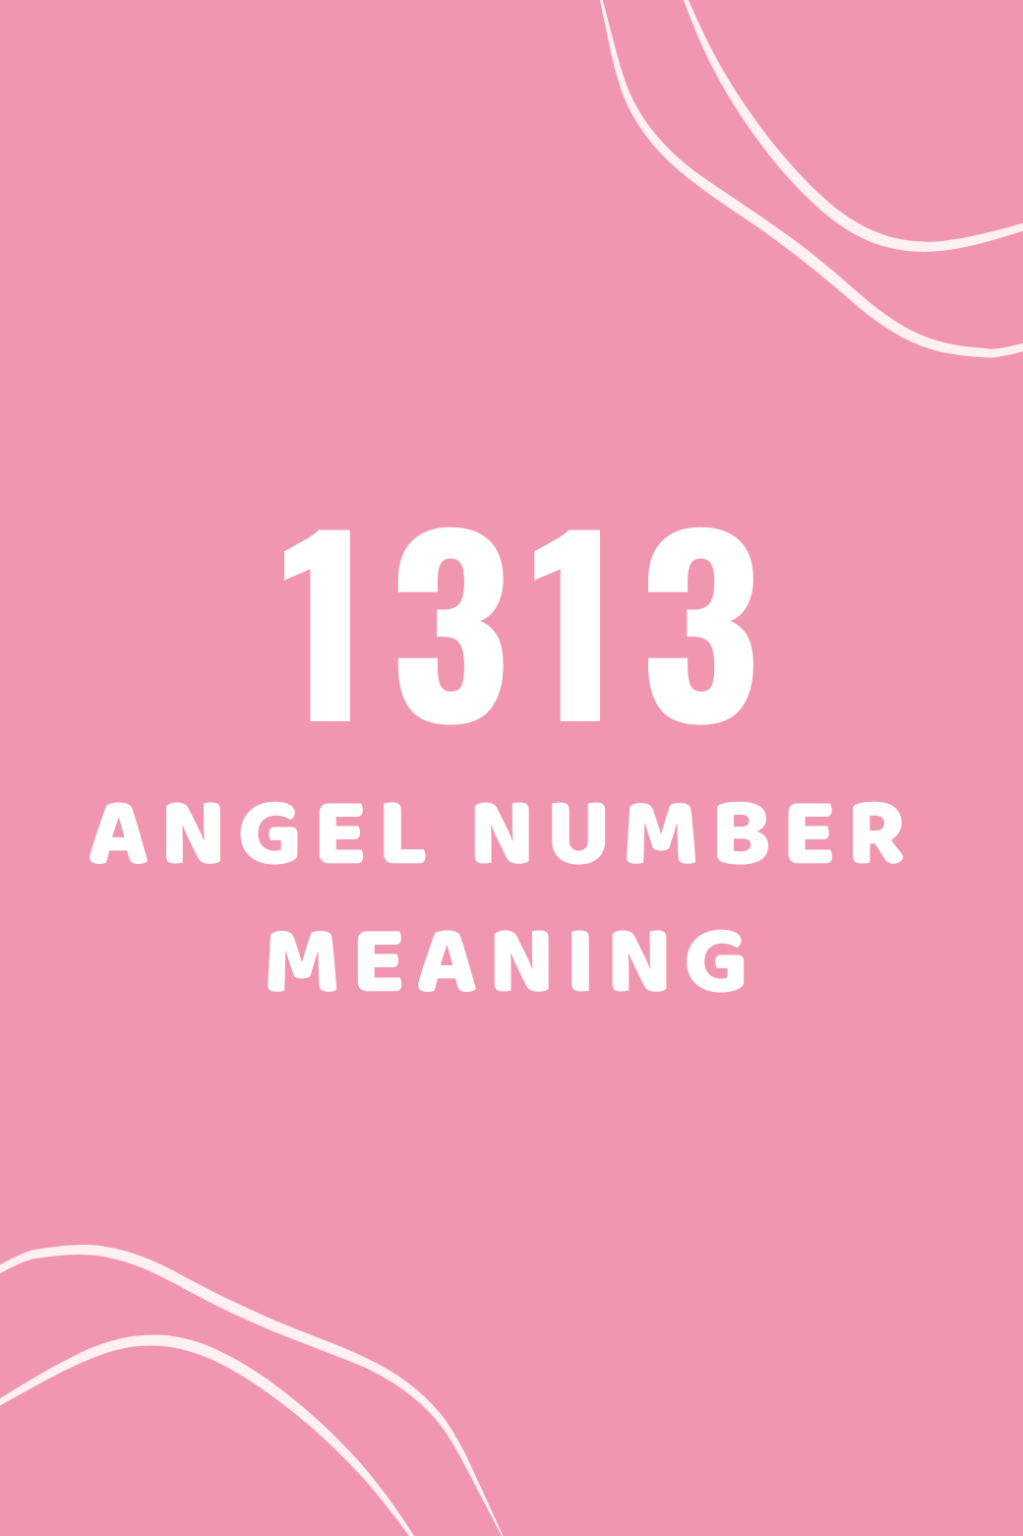 1313 meaning love